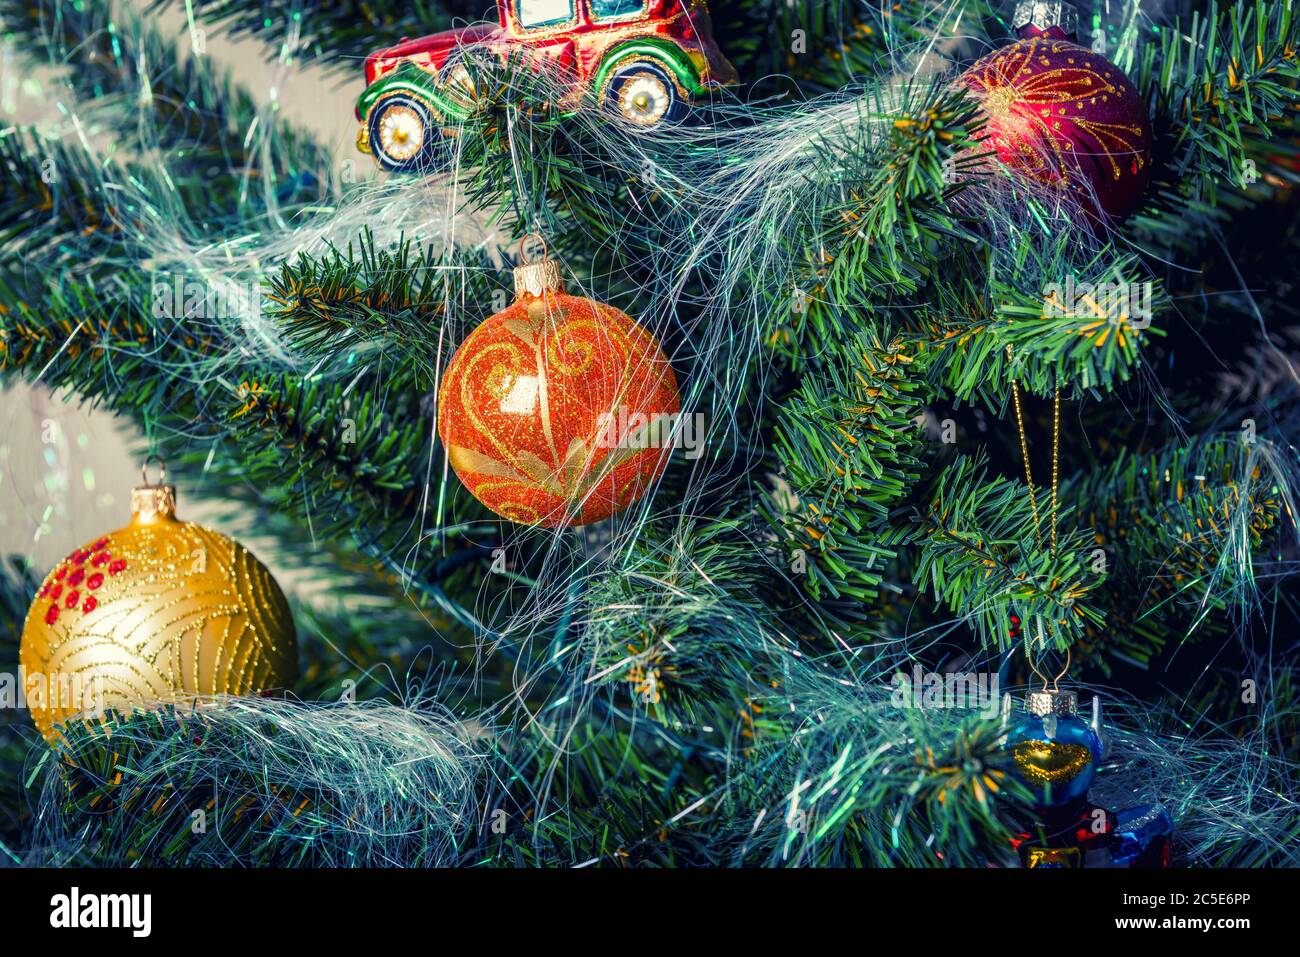 Merry Christmas and Happy New Year. Christmas tree decoration closeup. Stock Photo